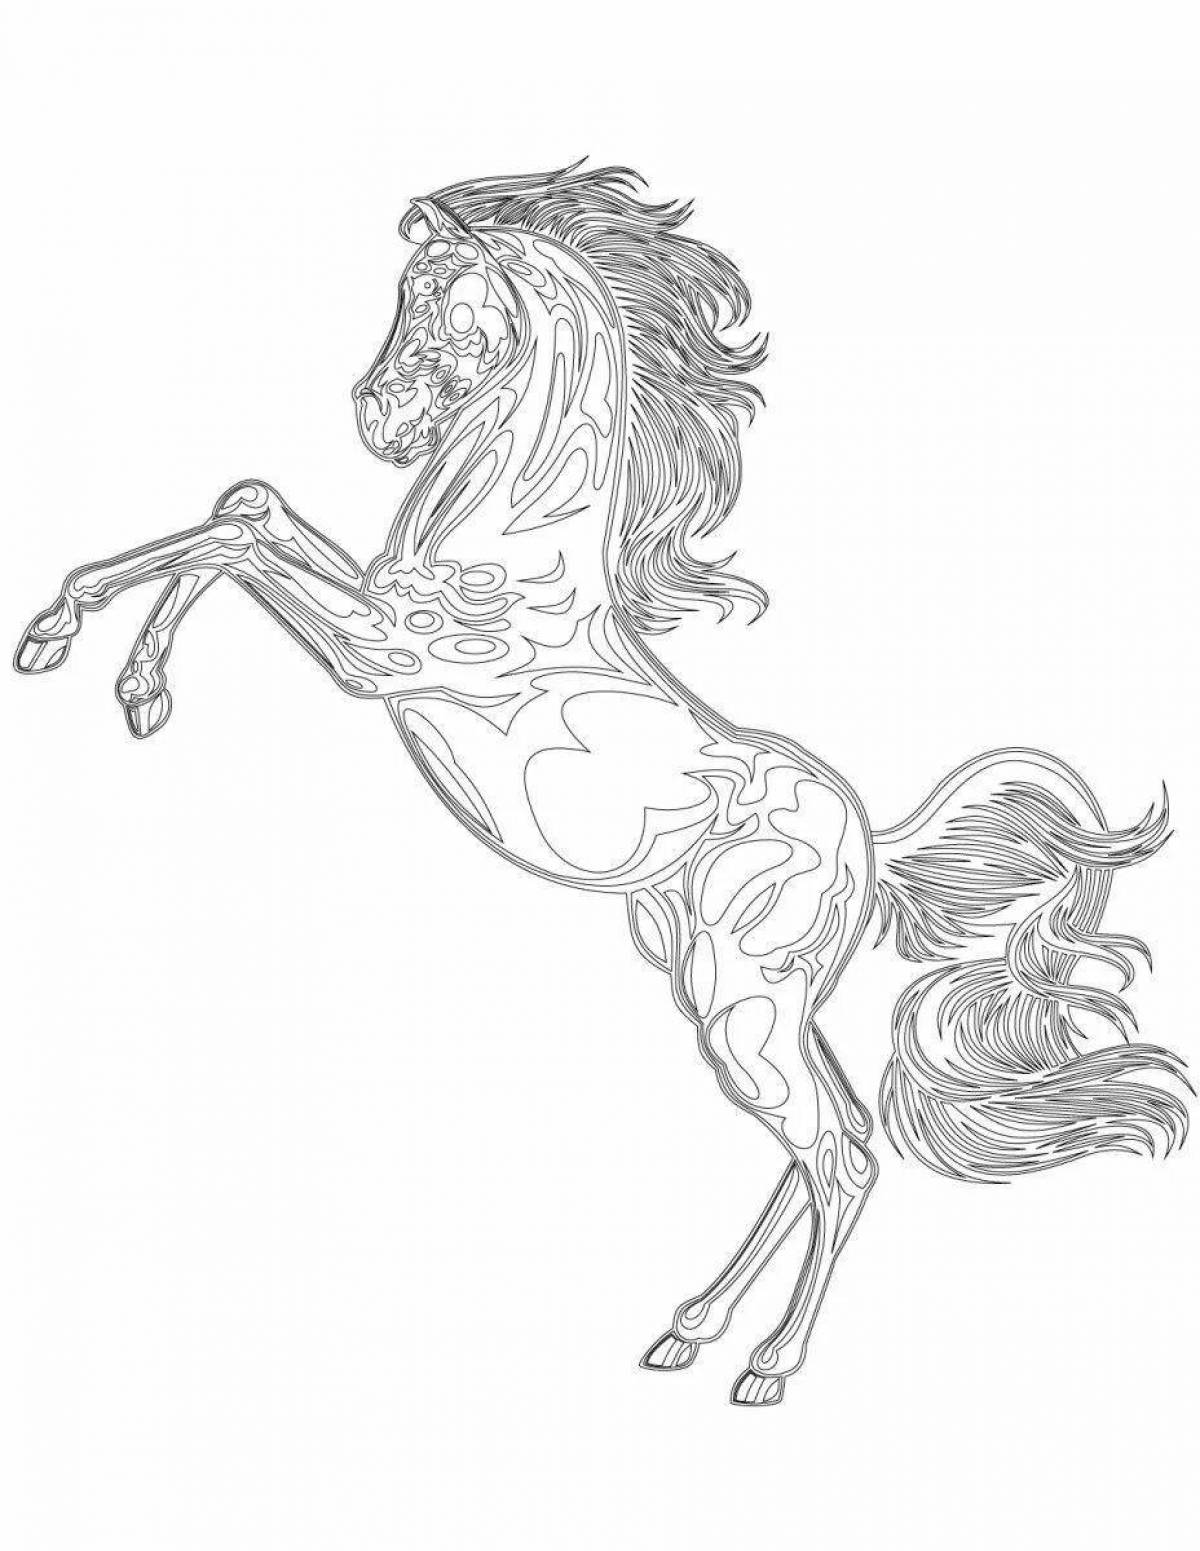 Coloring book bright rearing horse